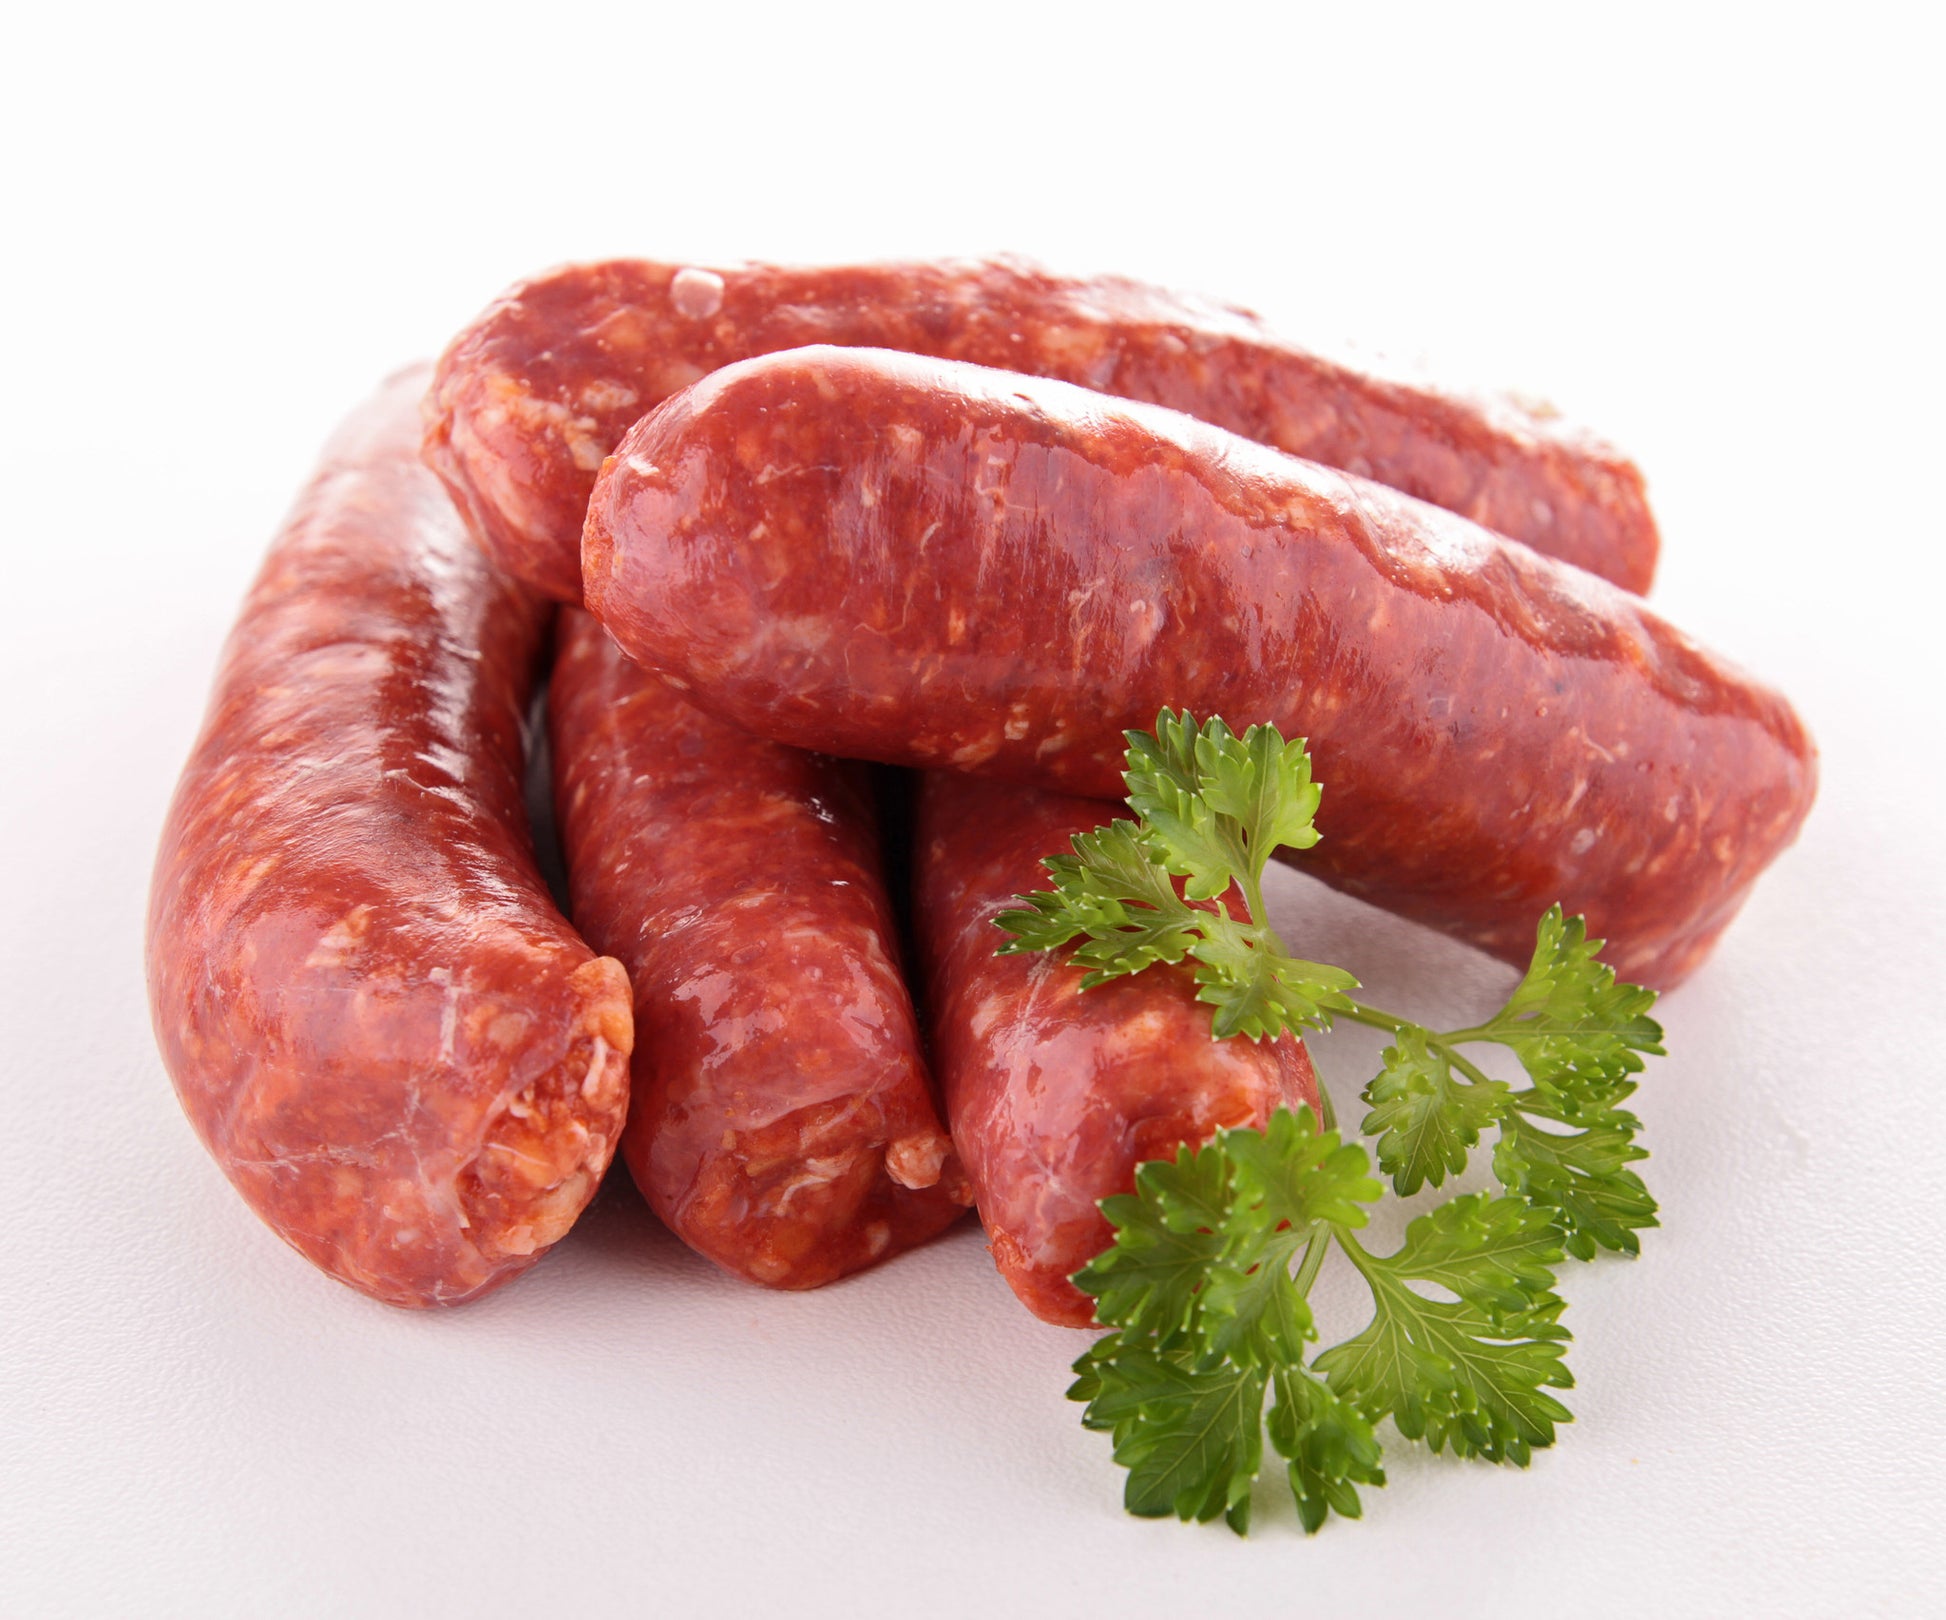 Hot Spanish Style Sausages - The Cheshire Butcher